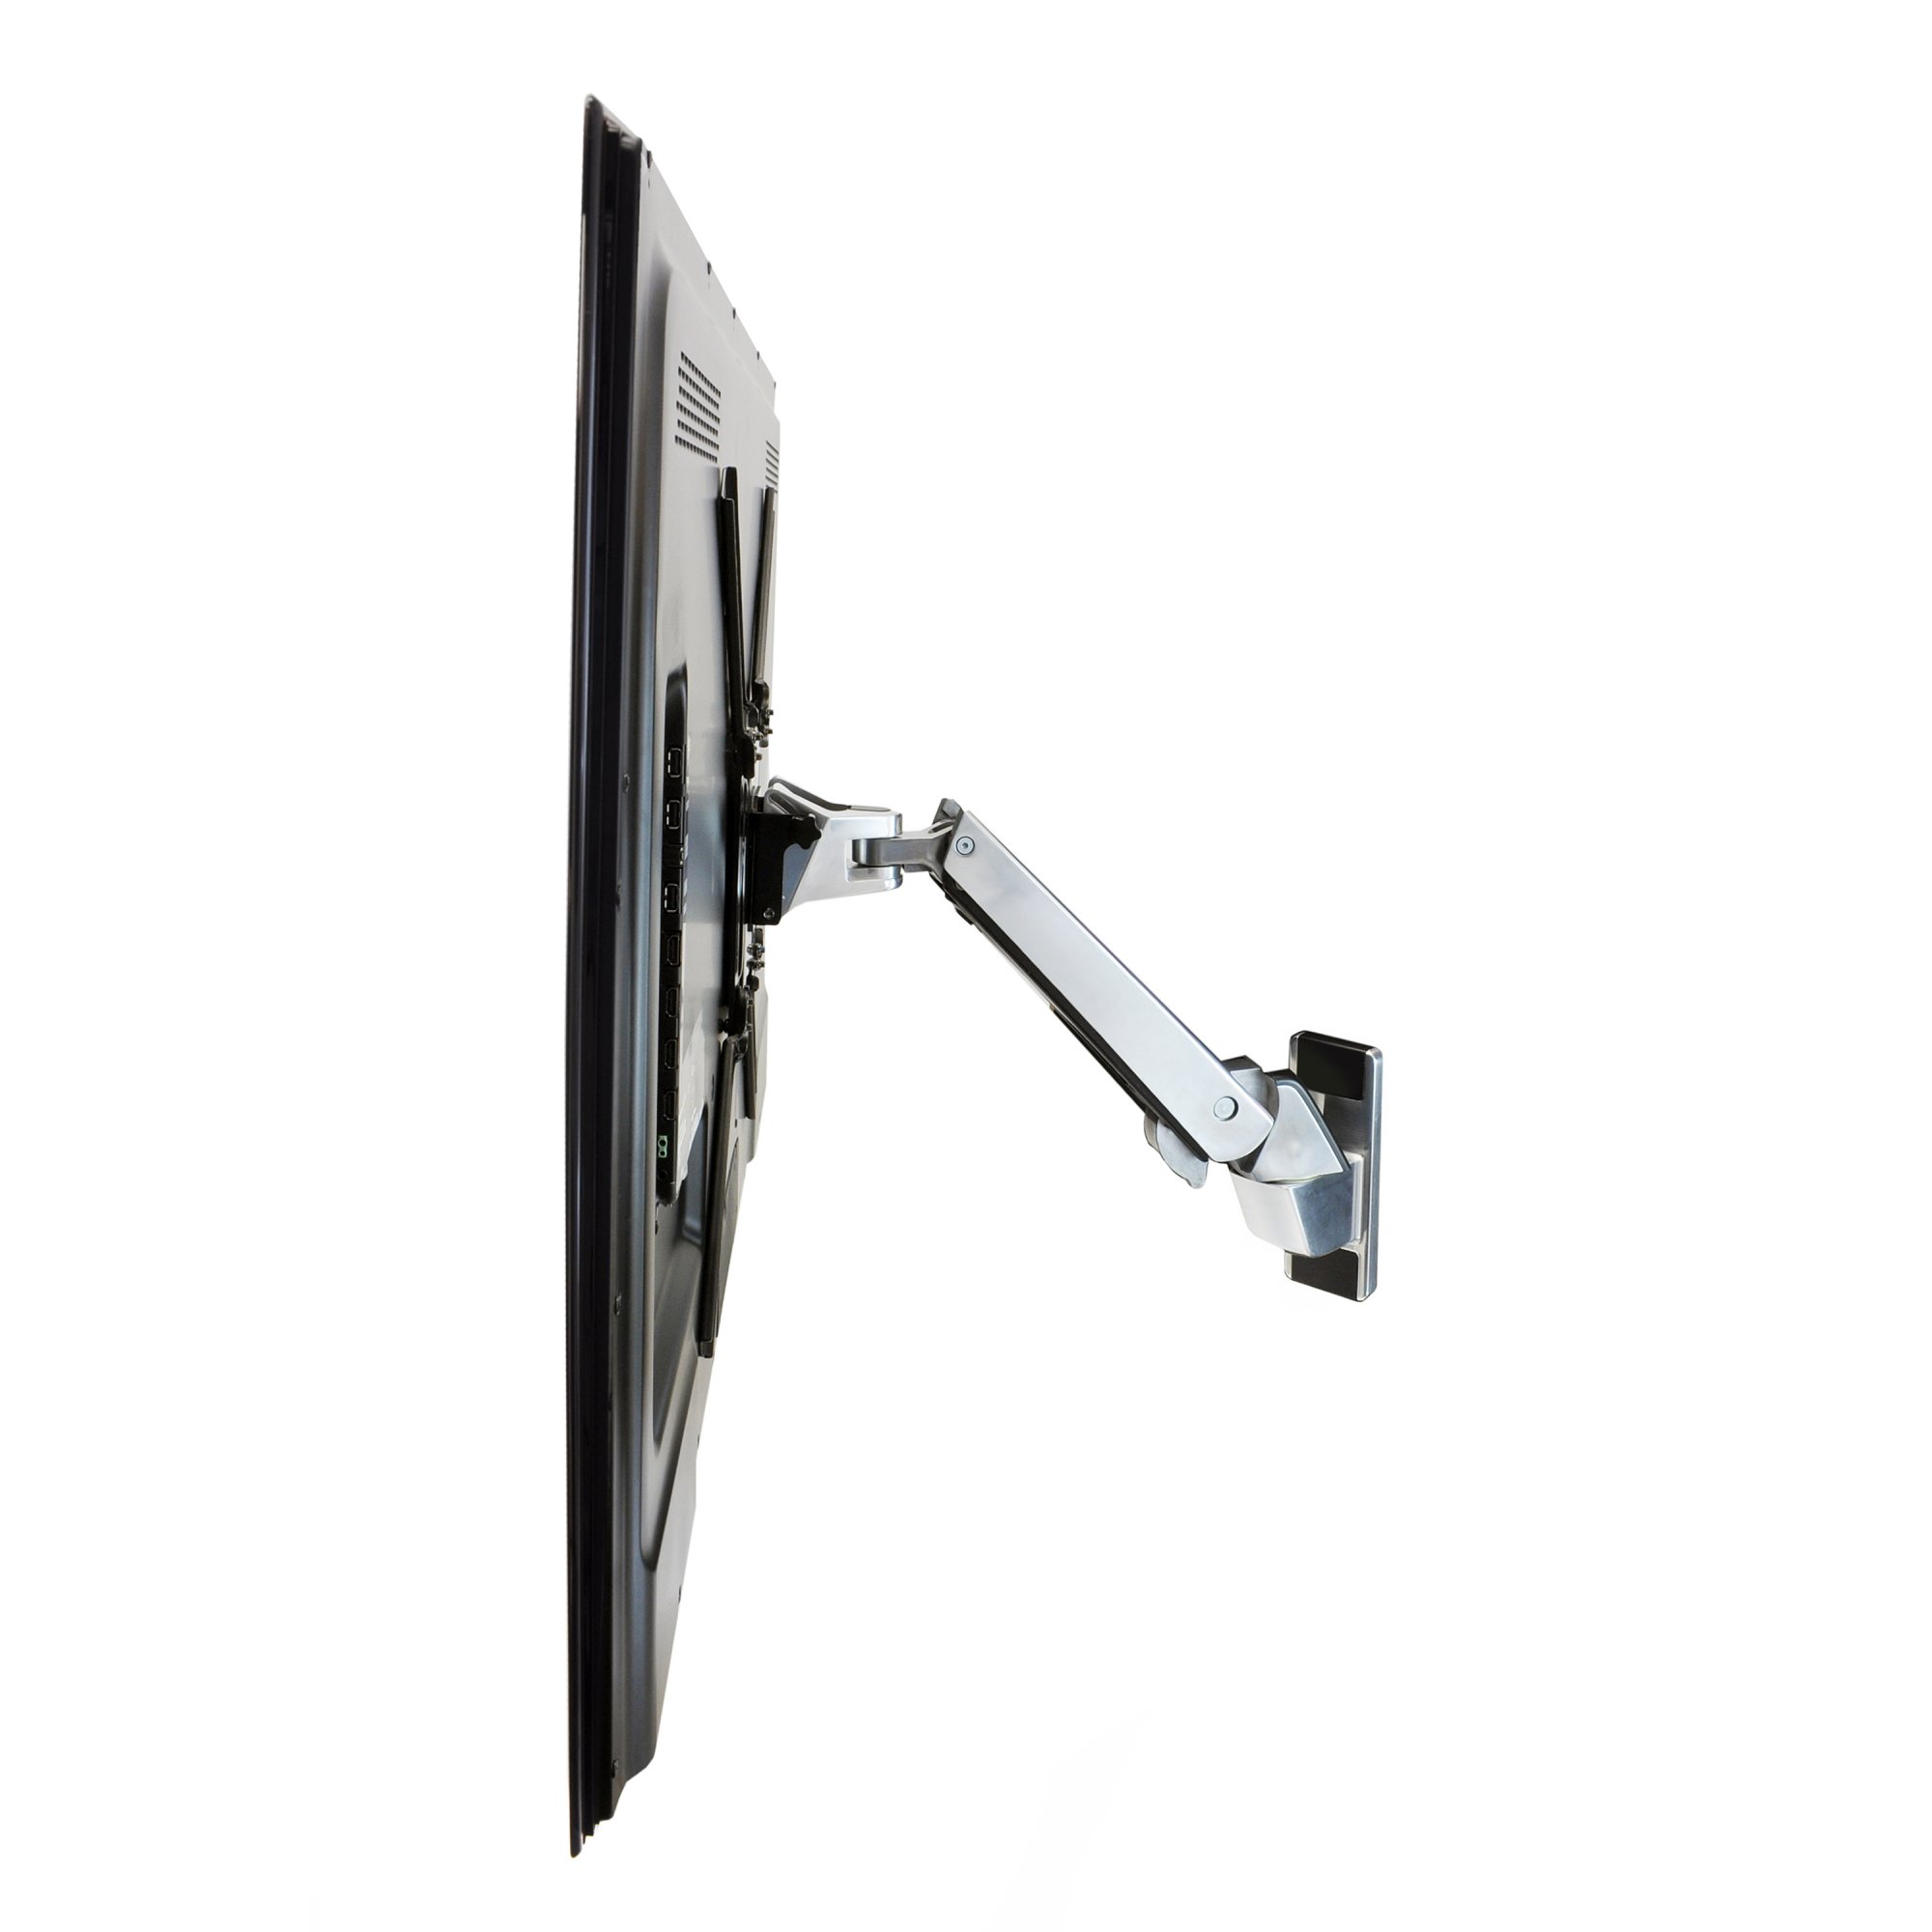 Ergotron 45-296-026 Height Adjustable Wall Mount Arm for TV, HD